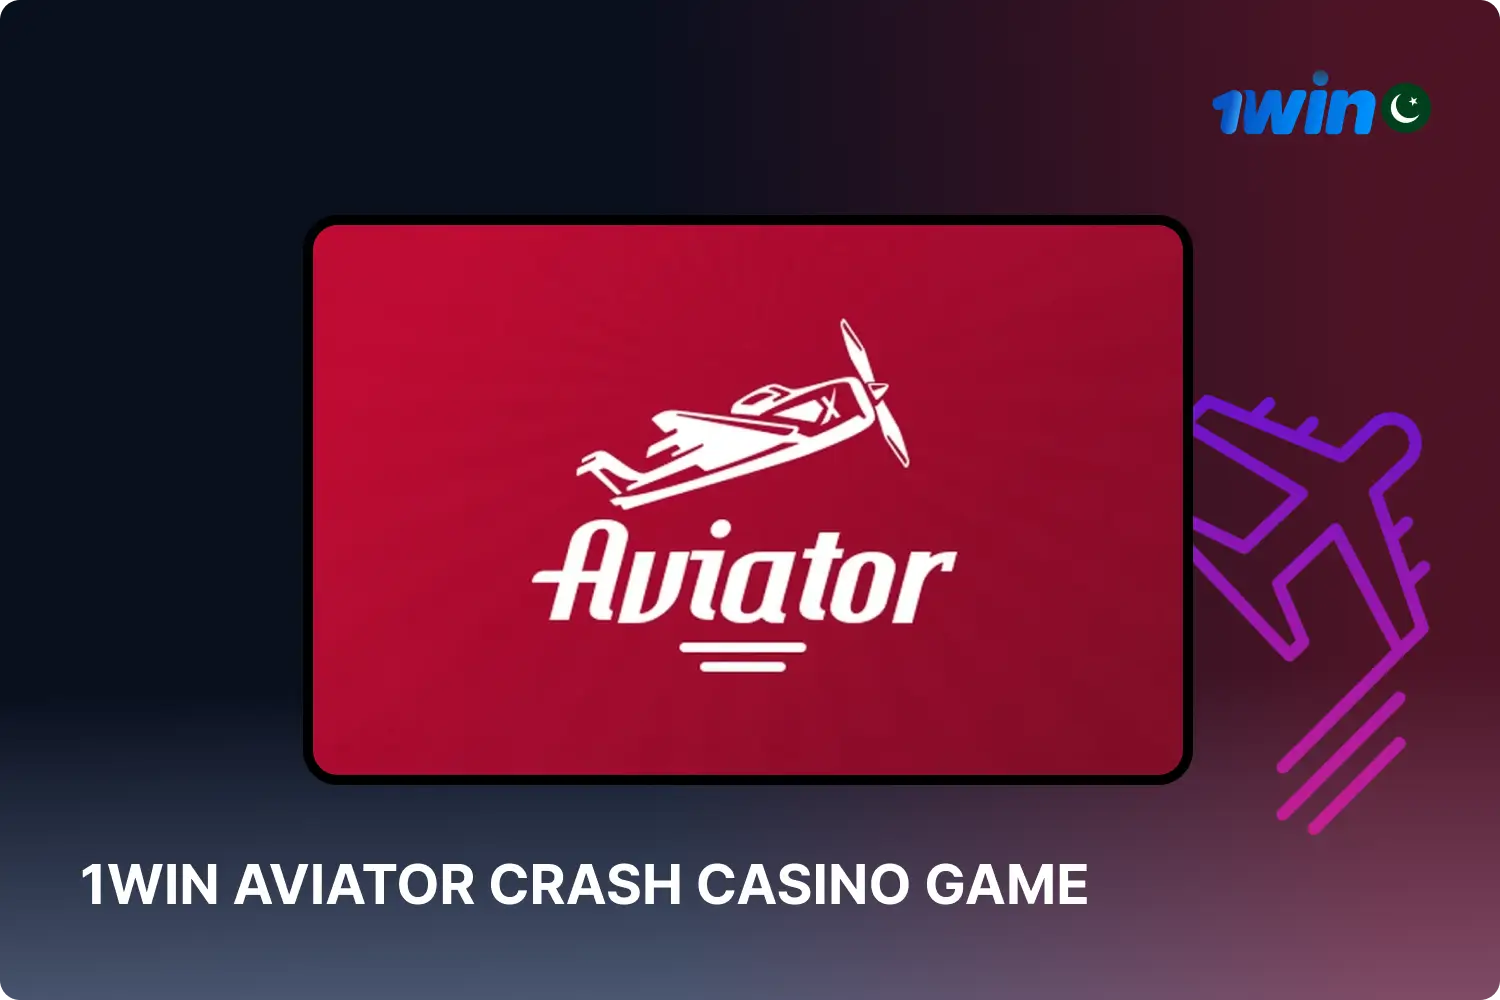 Popular among players in Pakistan, the Aviator Crash game is available to play for real money at 1win Casino